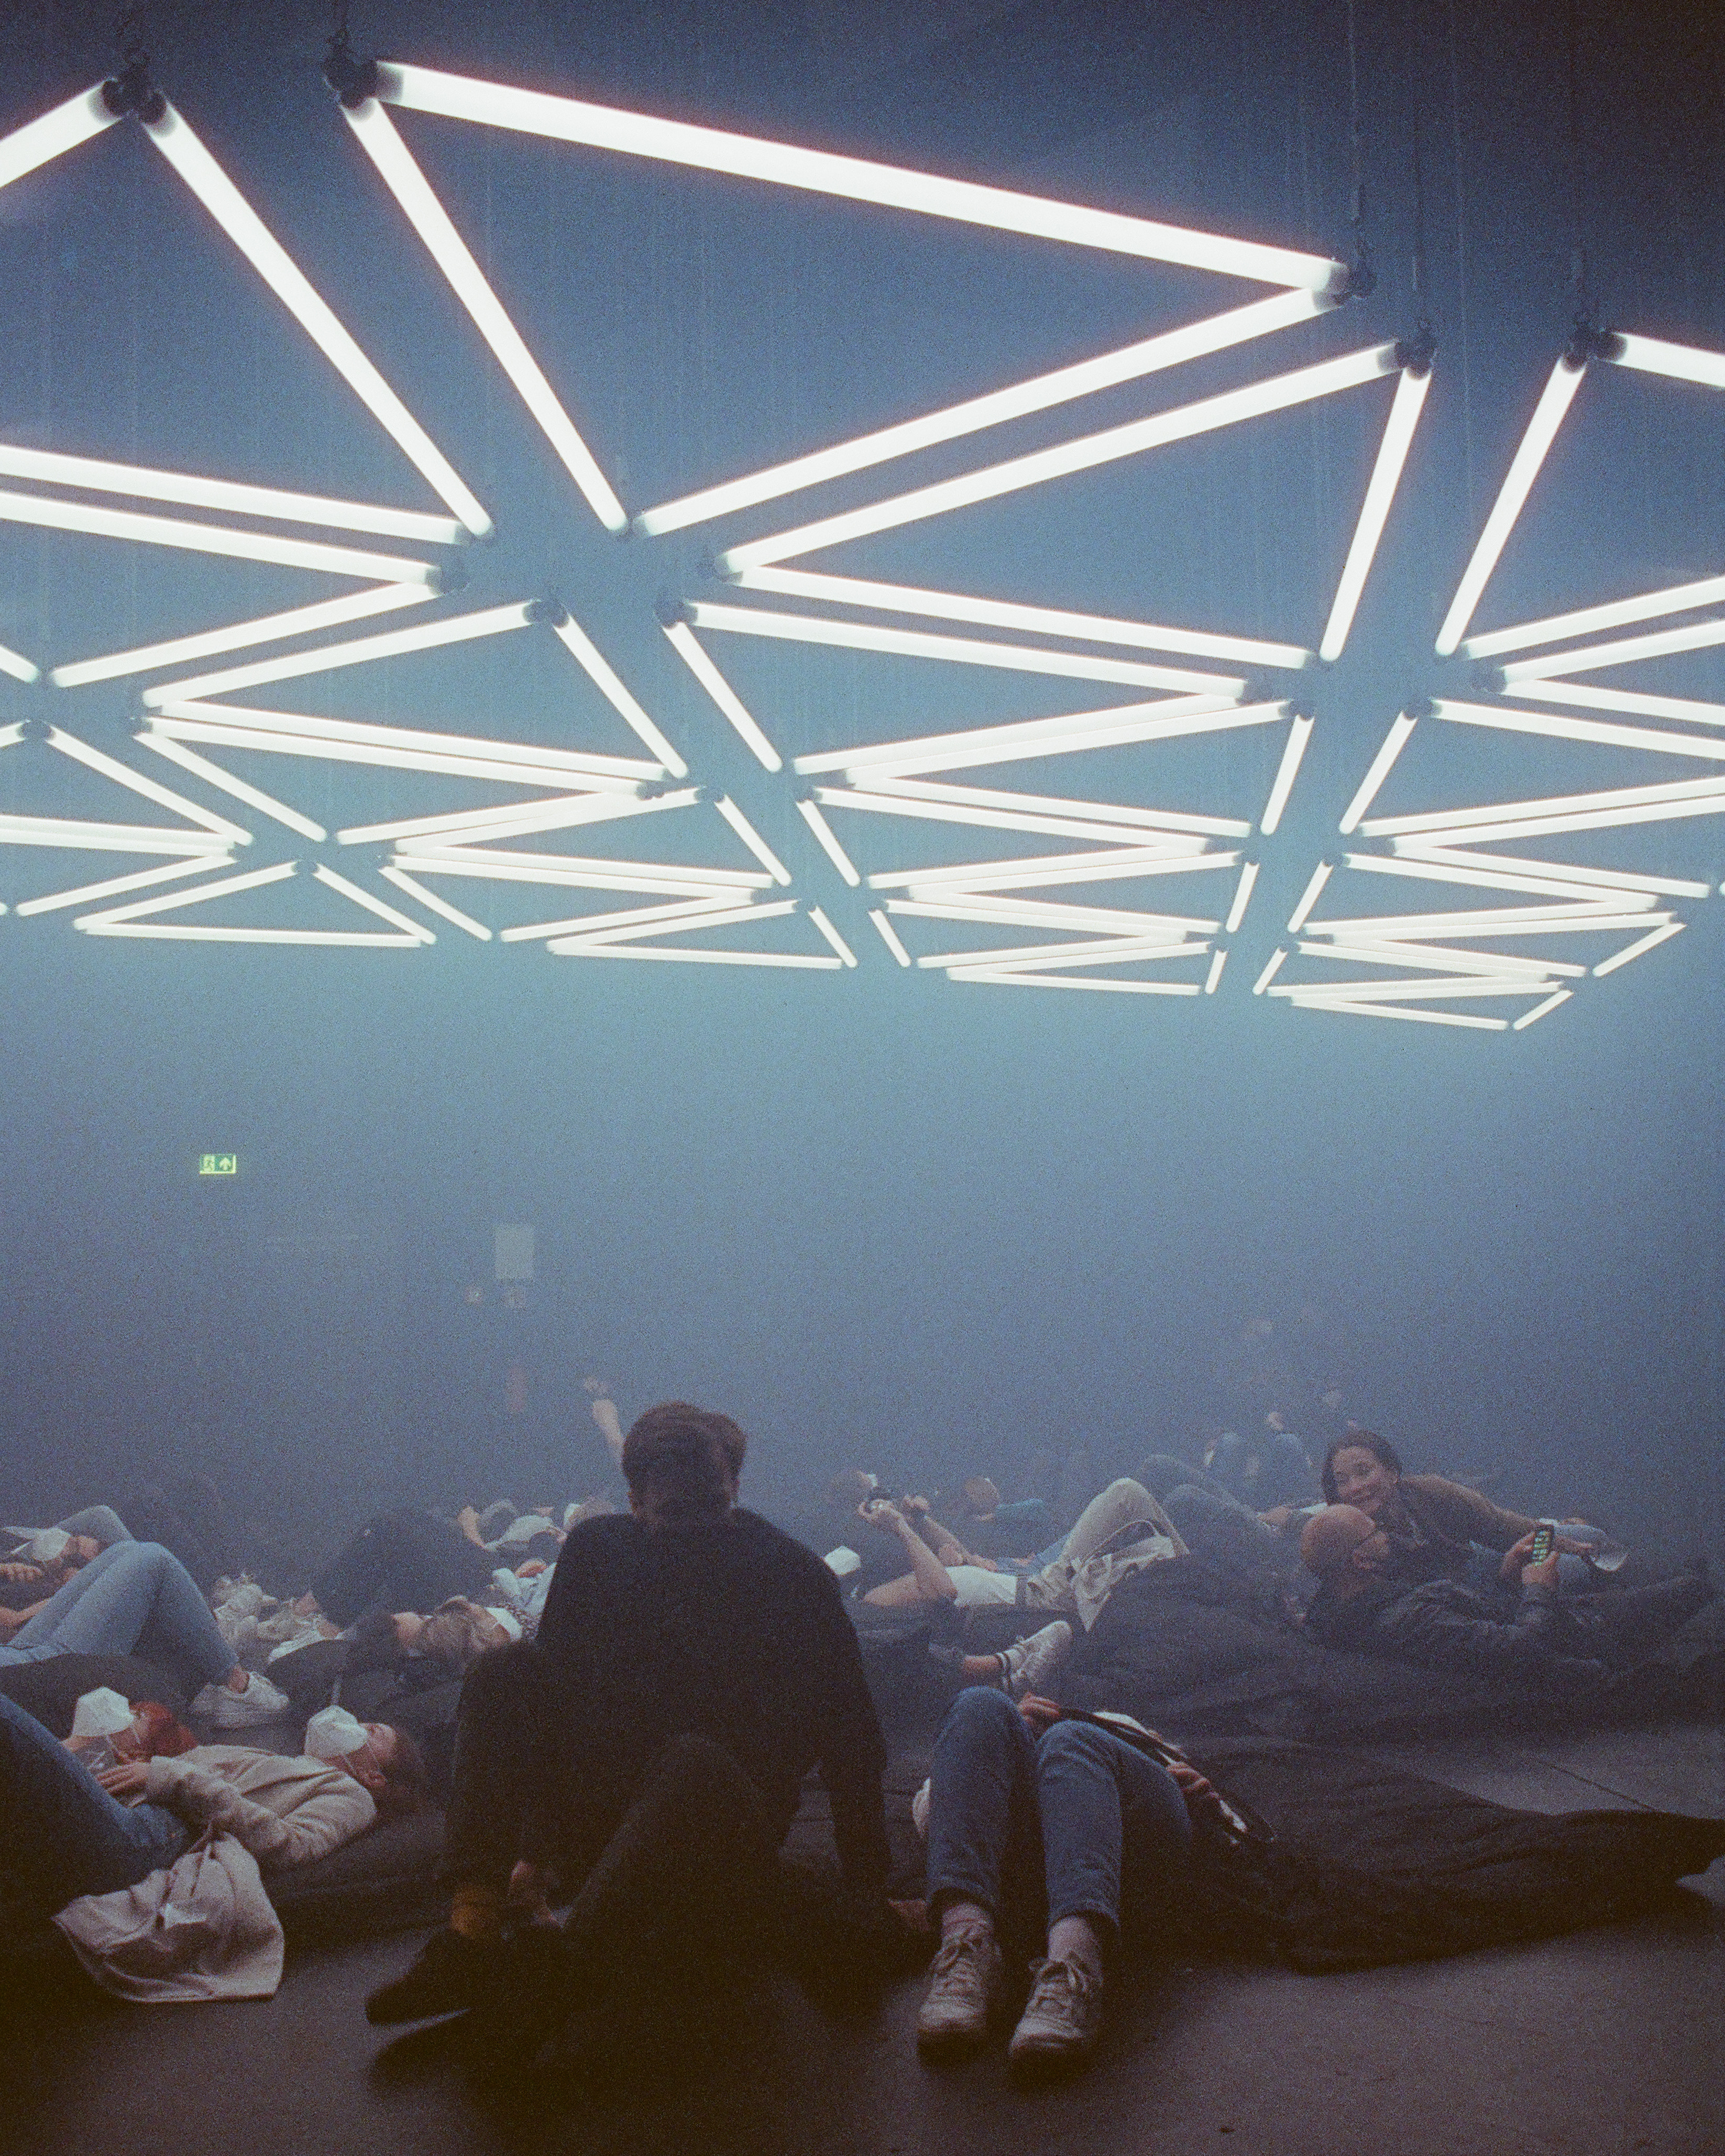 People lie on the ground under a light up display